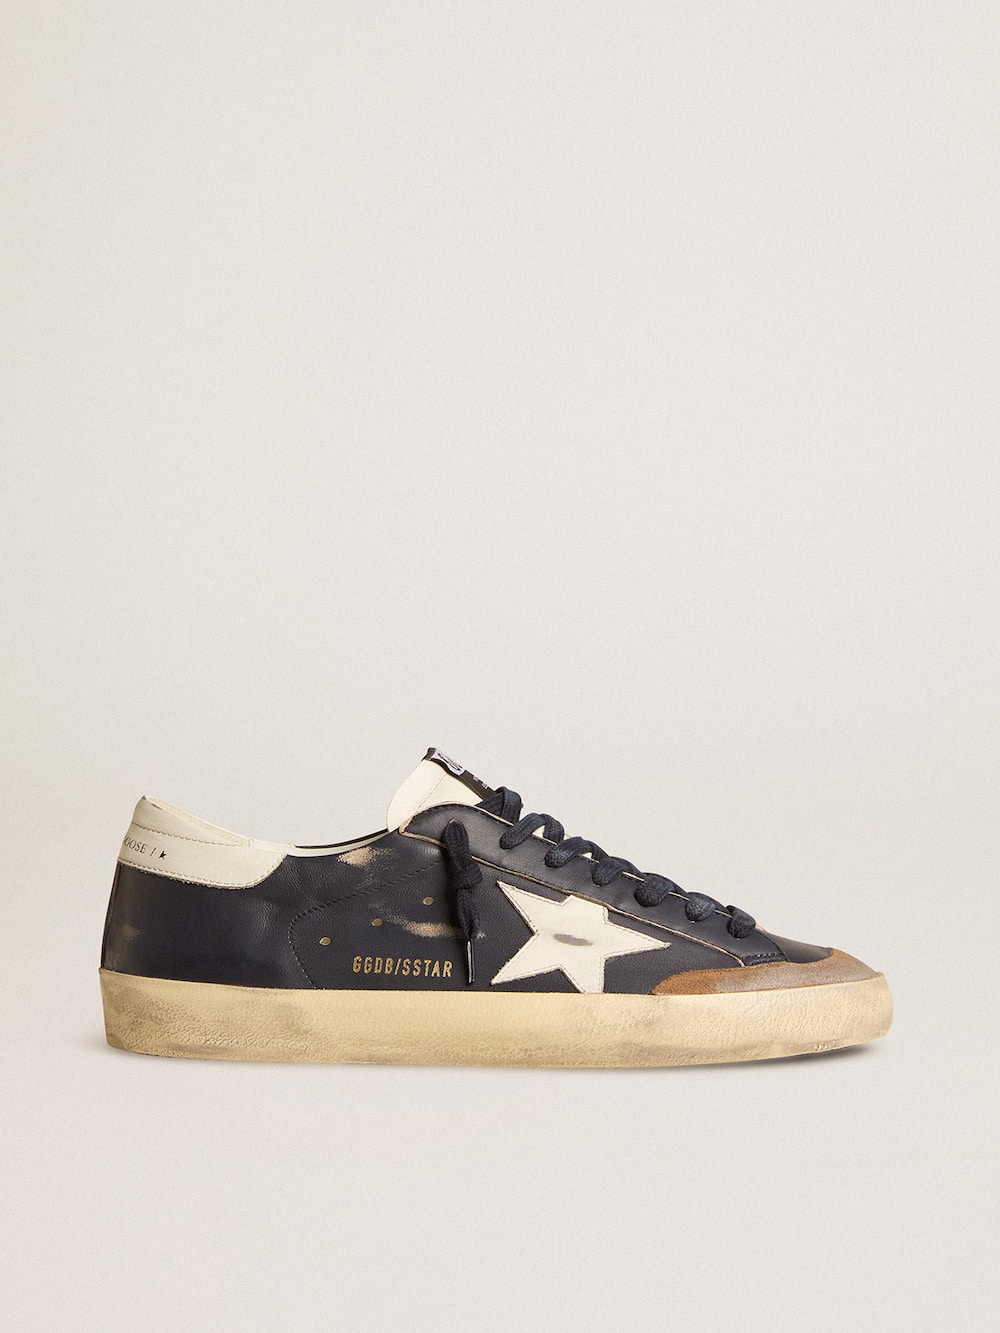 Golden Goose - Men's Super-Star in blue nappa leather with white leather star and heel tab in 